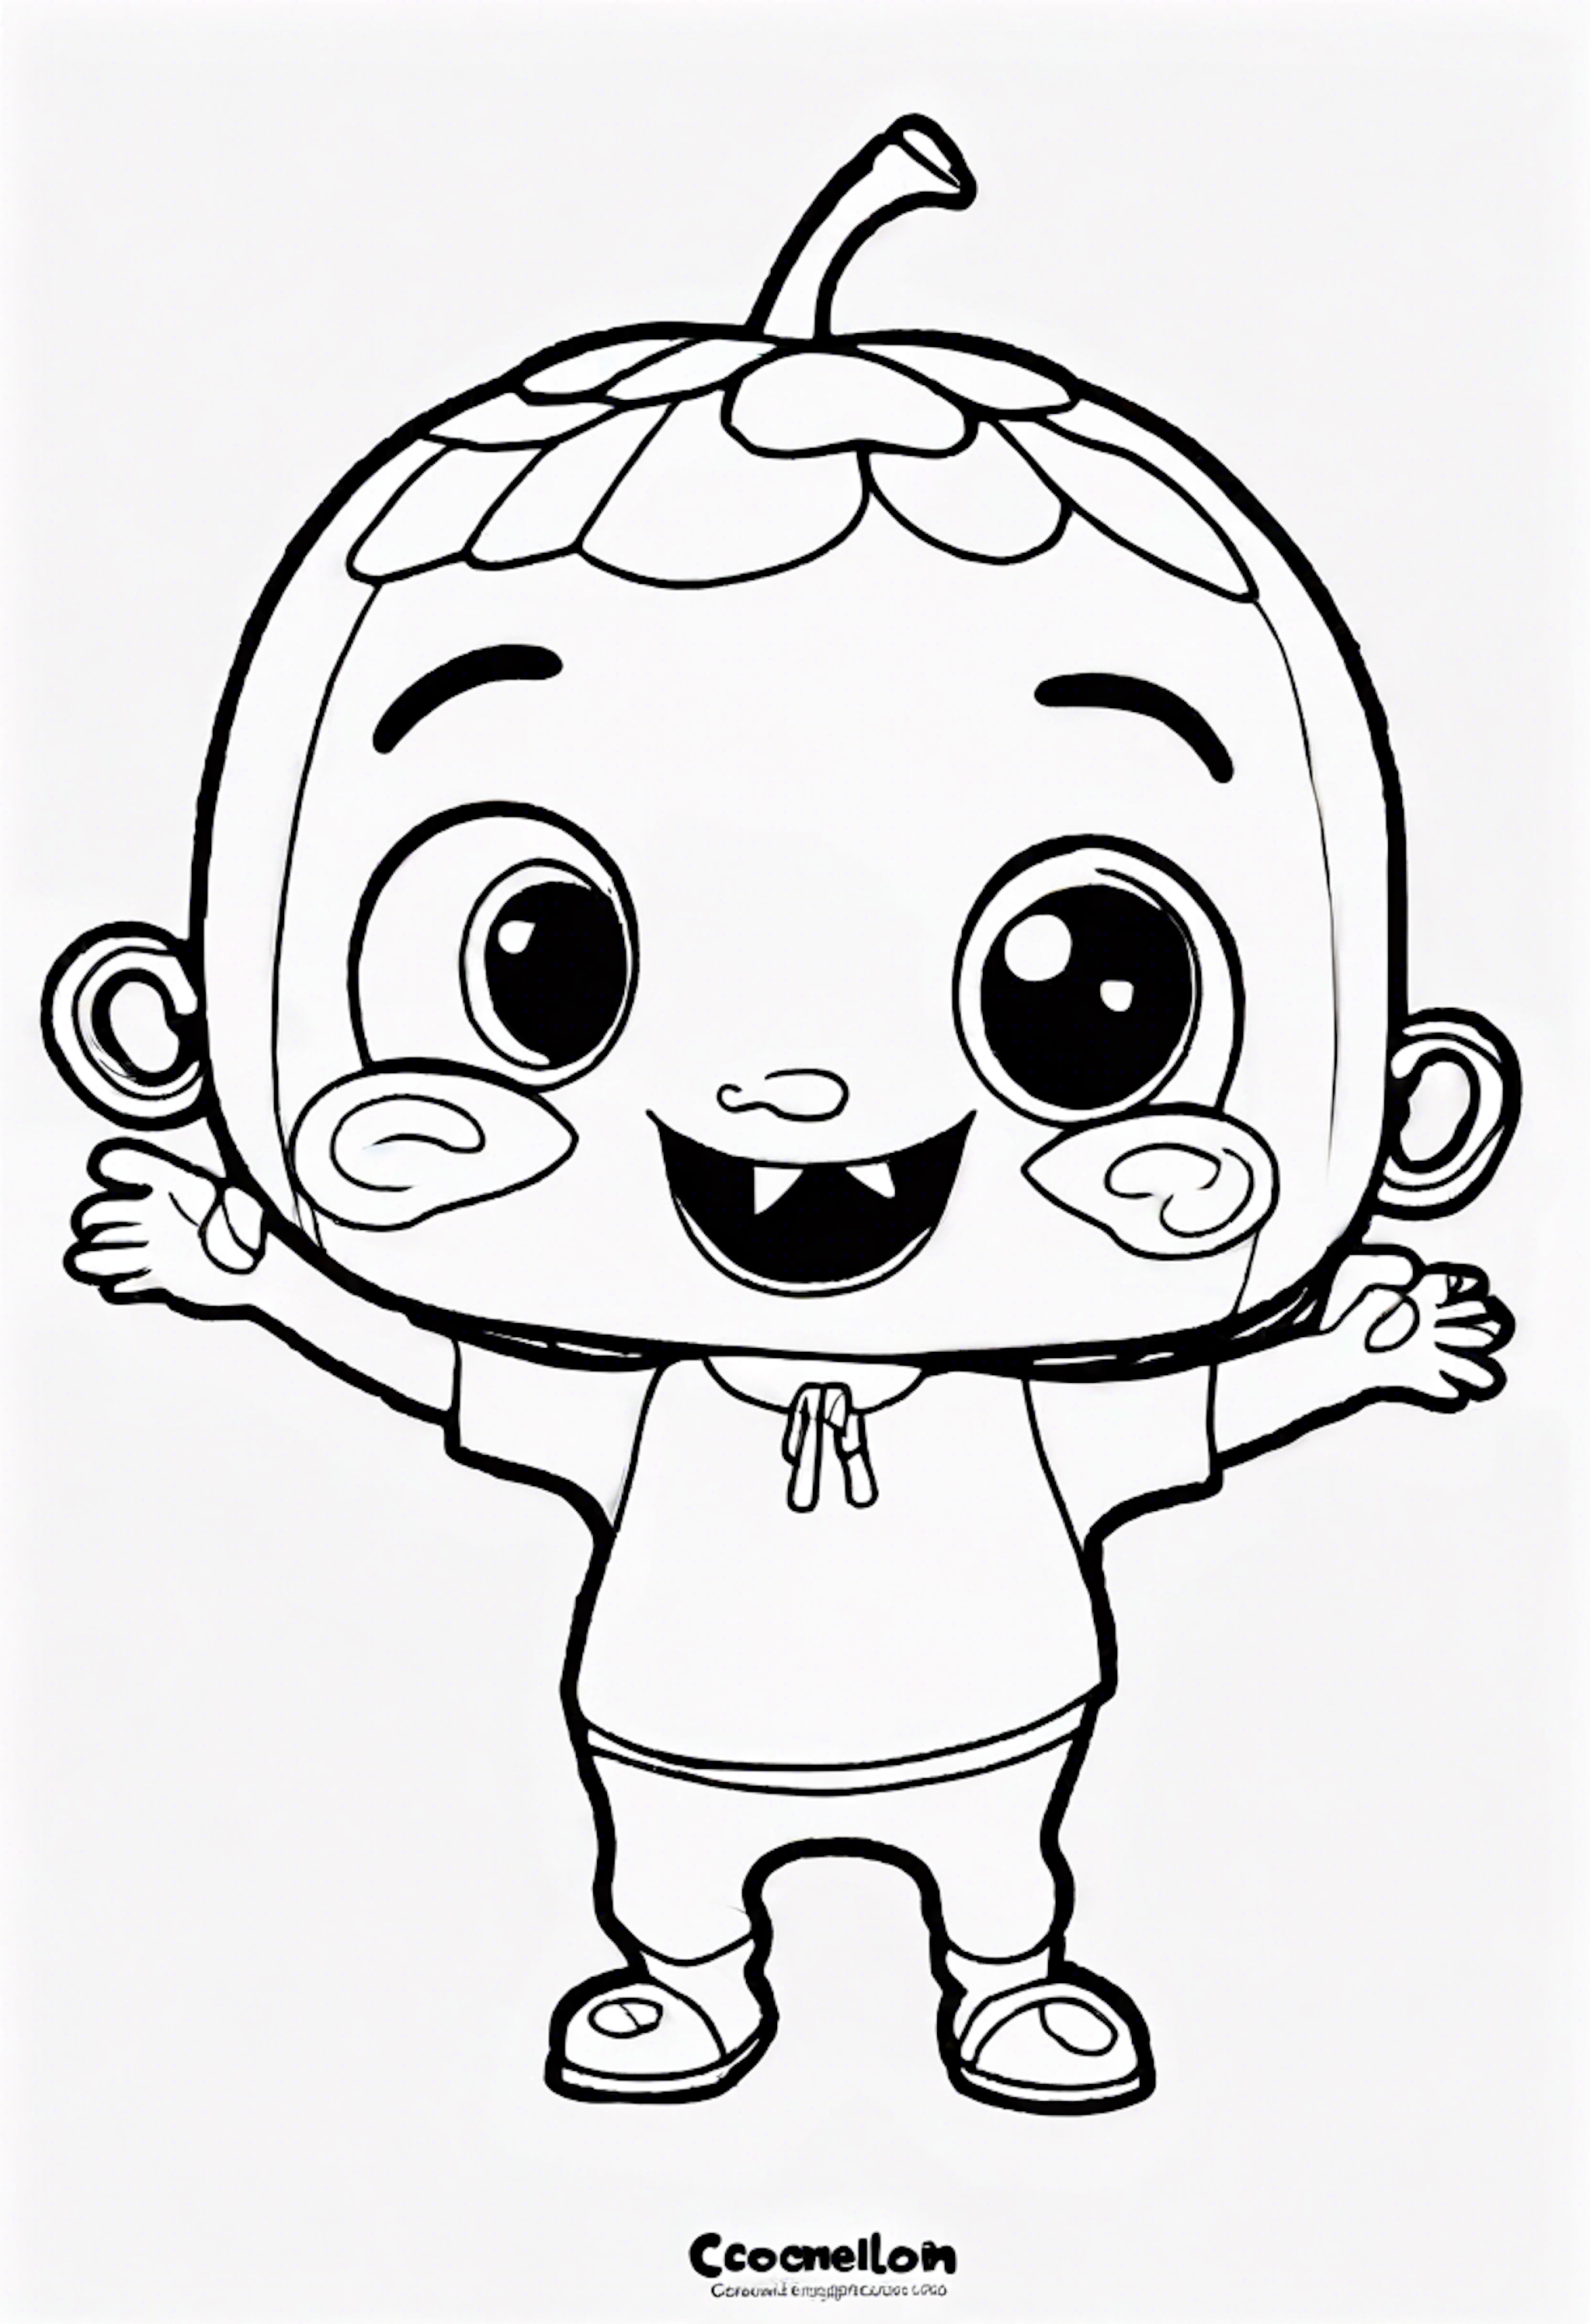 A coloring page for 1 Cocomelon coloring pages